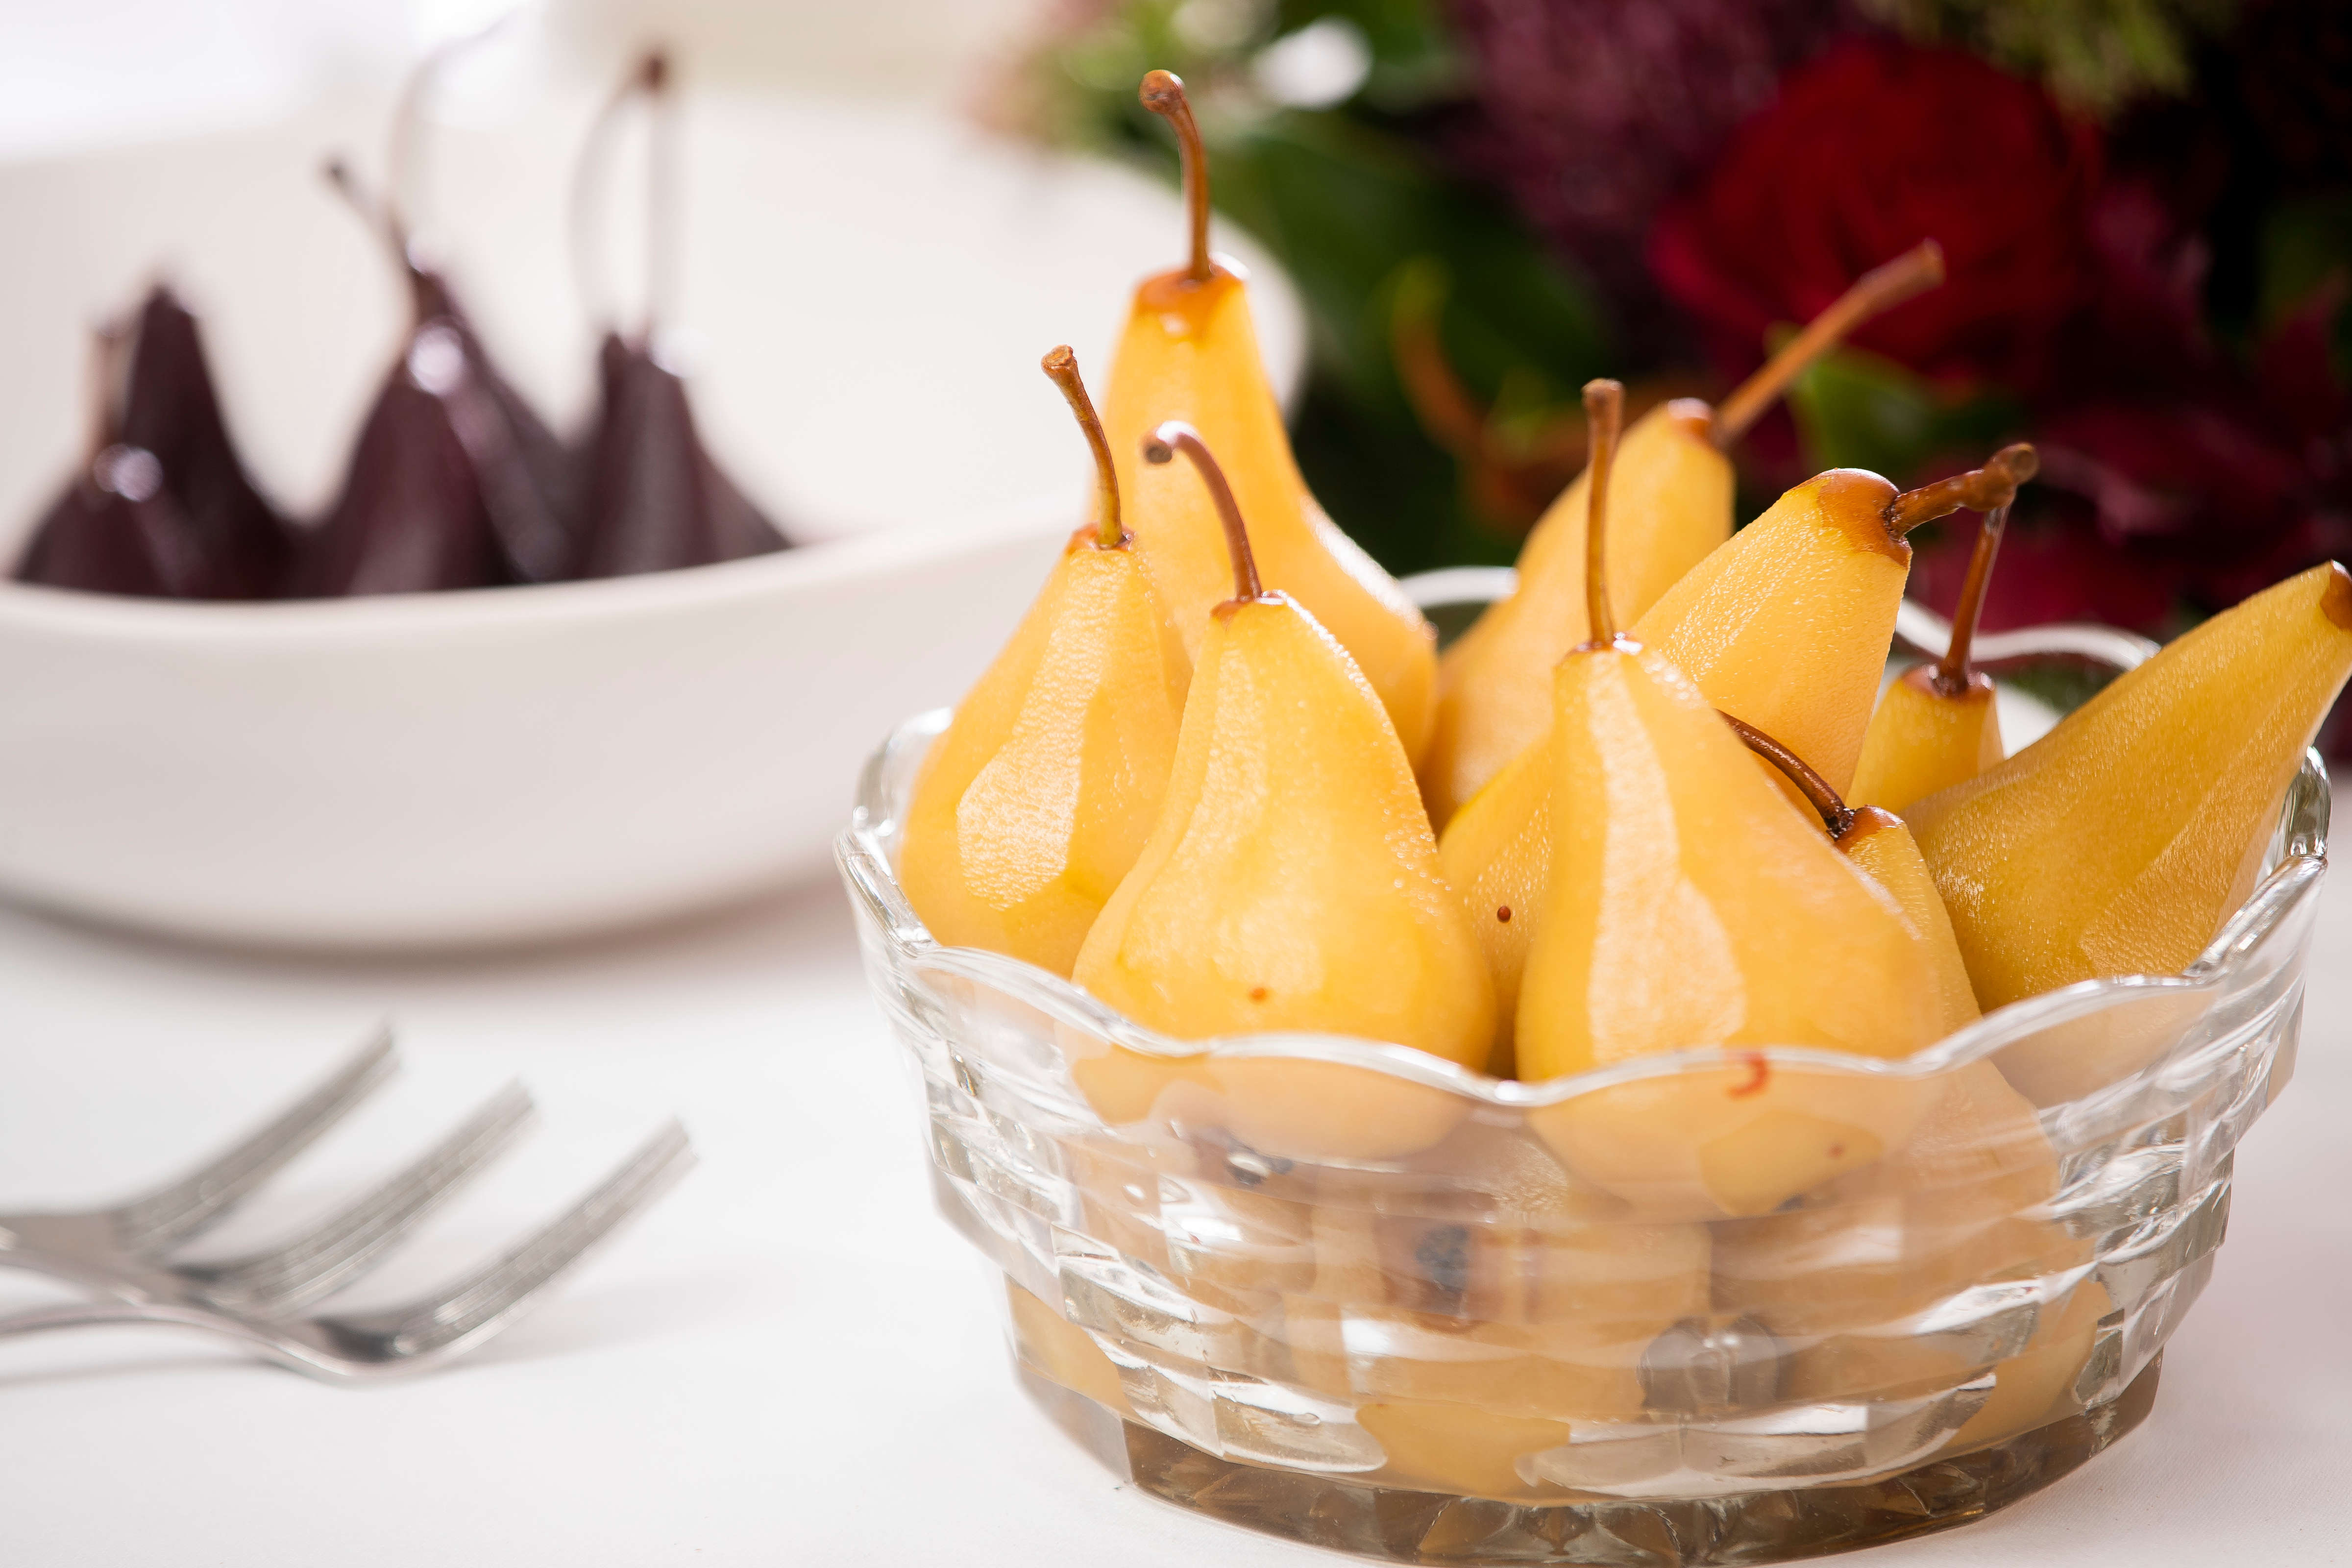 Close up photo of pears that have been poached in saffron syrup in a cut glass bowl with red wine poached pears in the background. Photo: Richard Jupe.